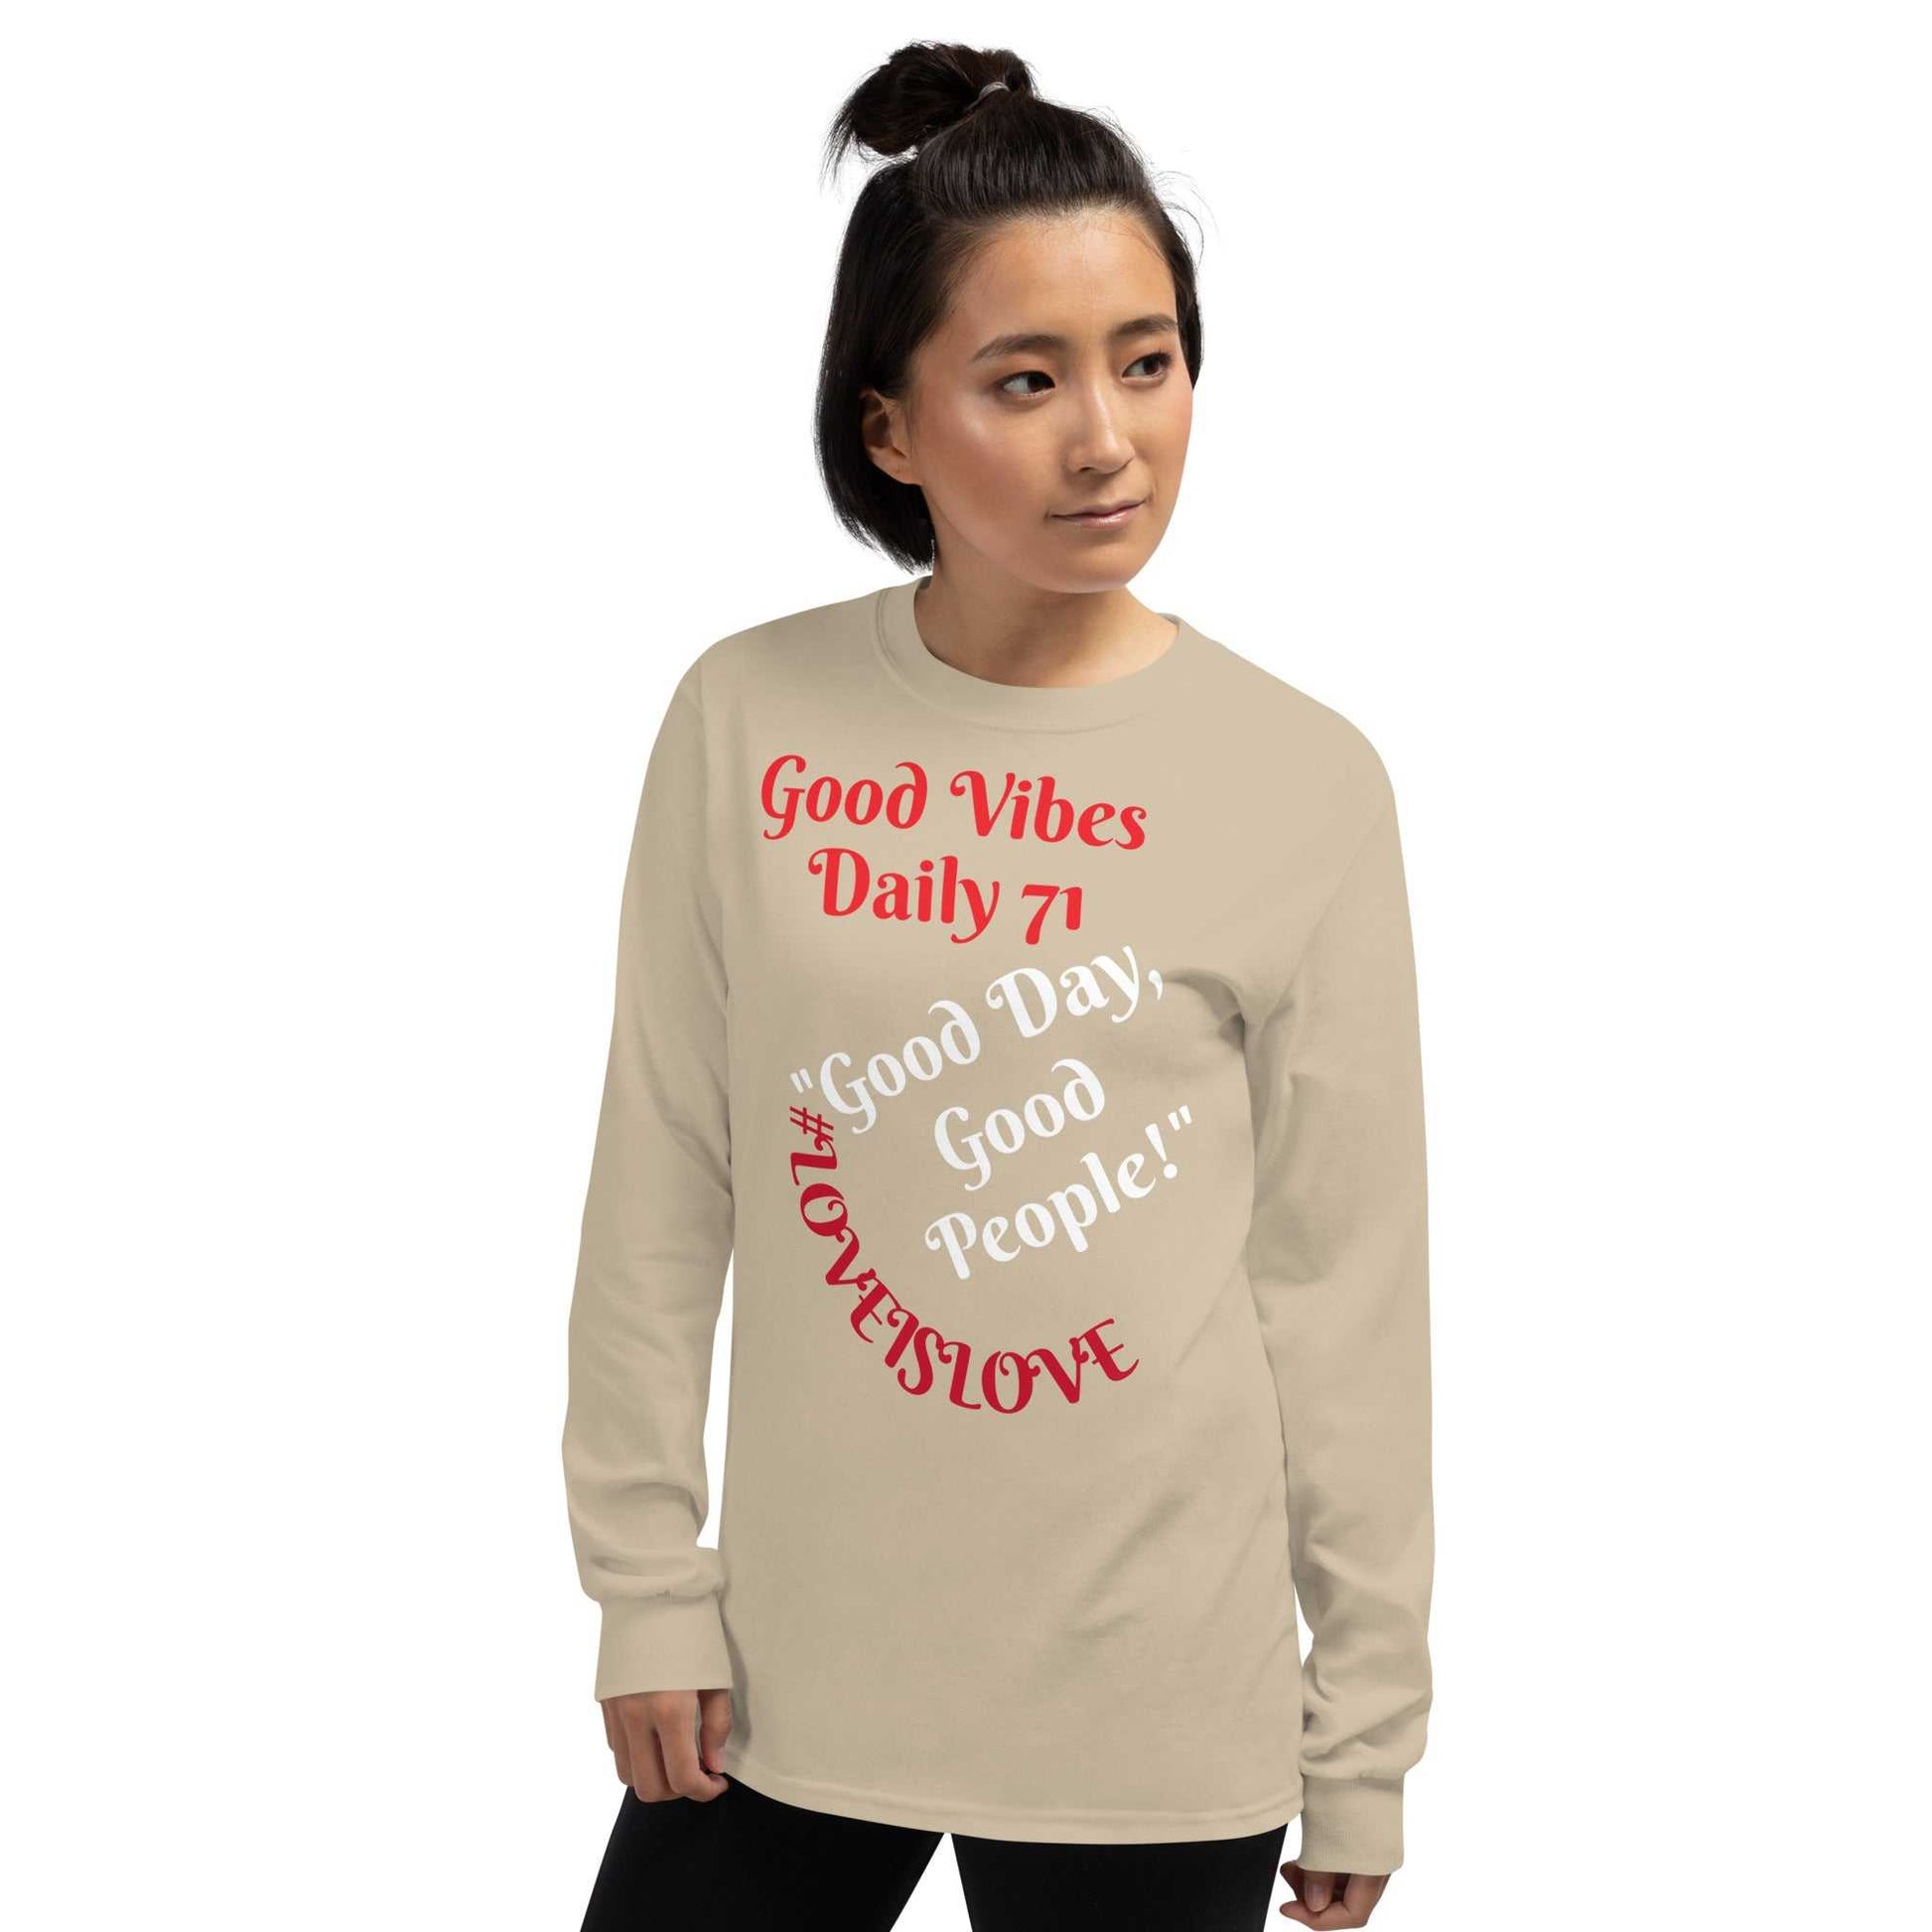 Good Vibes Men’s Long Sleeve Shirt Long Sleeve T-shirts and Joggers Good Vibes Daily Lab 44